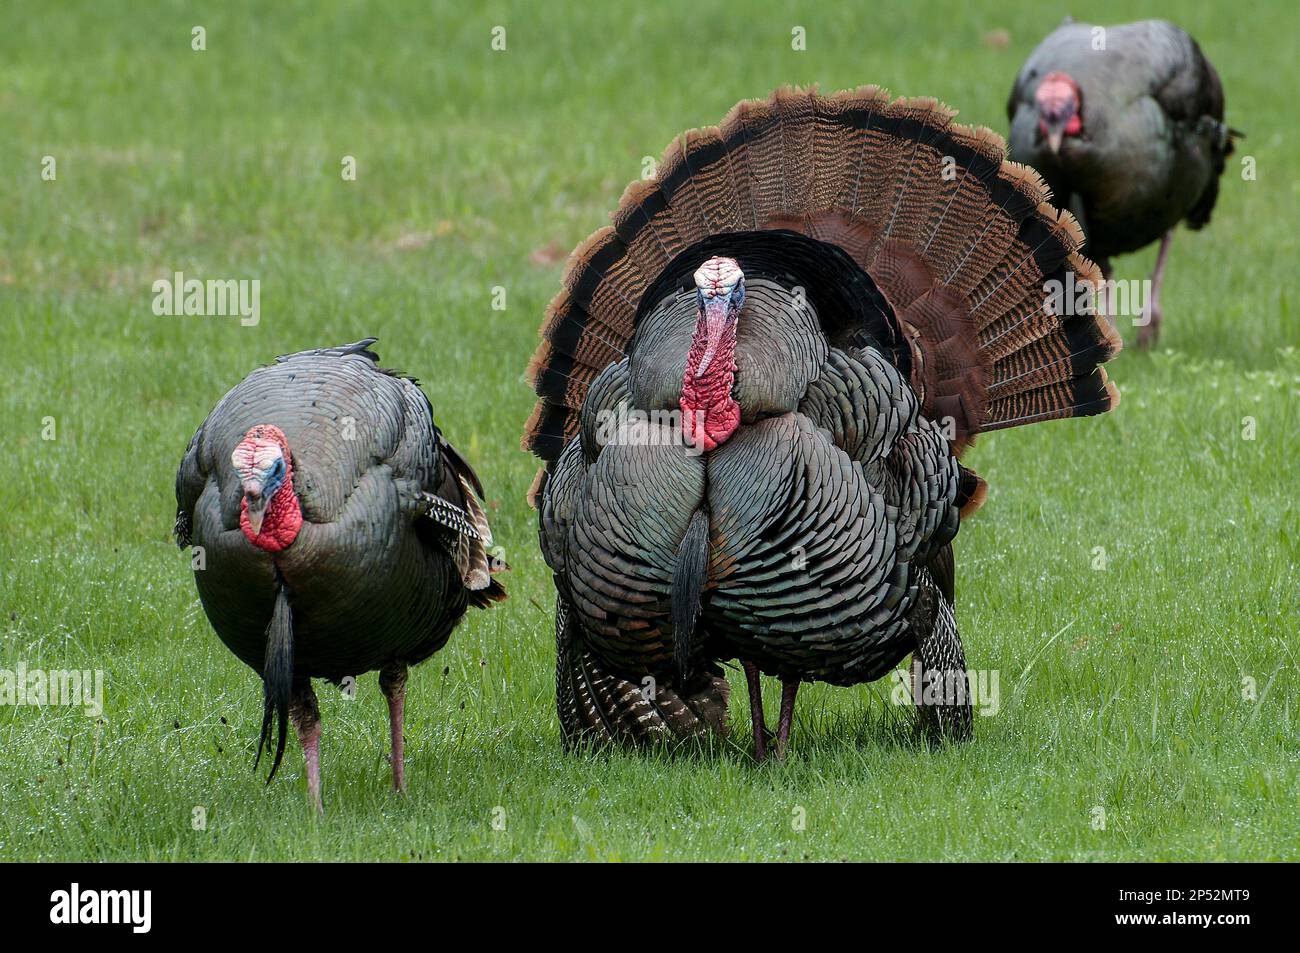 2 Gobblers (adult male) Eastern Wild Turkey displaying their feathers to attract near-by hens (female) during Spring breeding season. Stock Photo